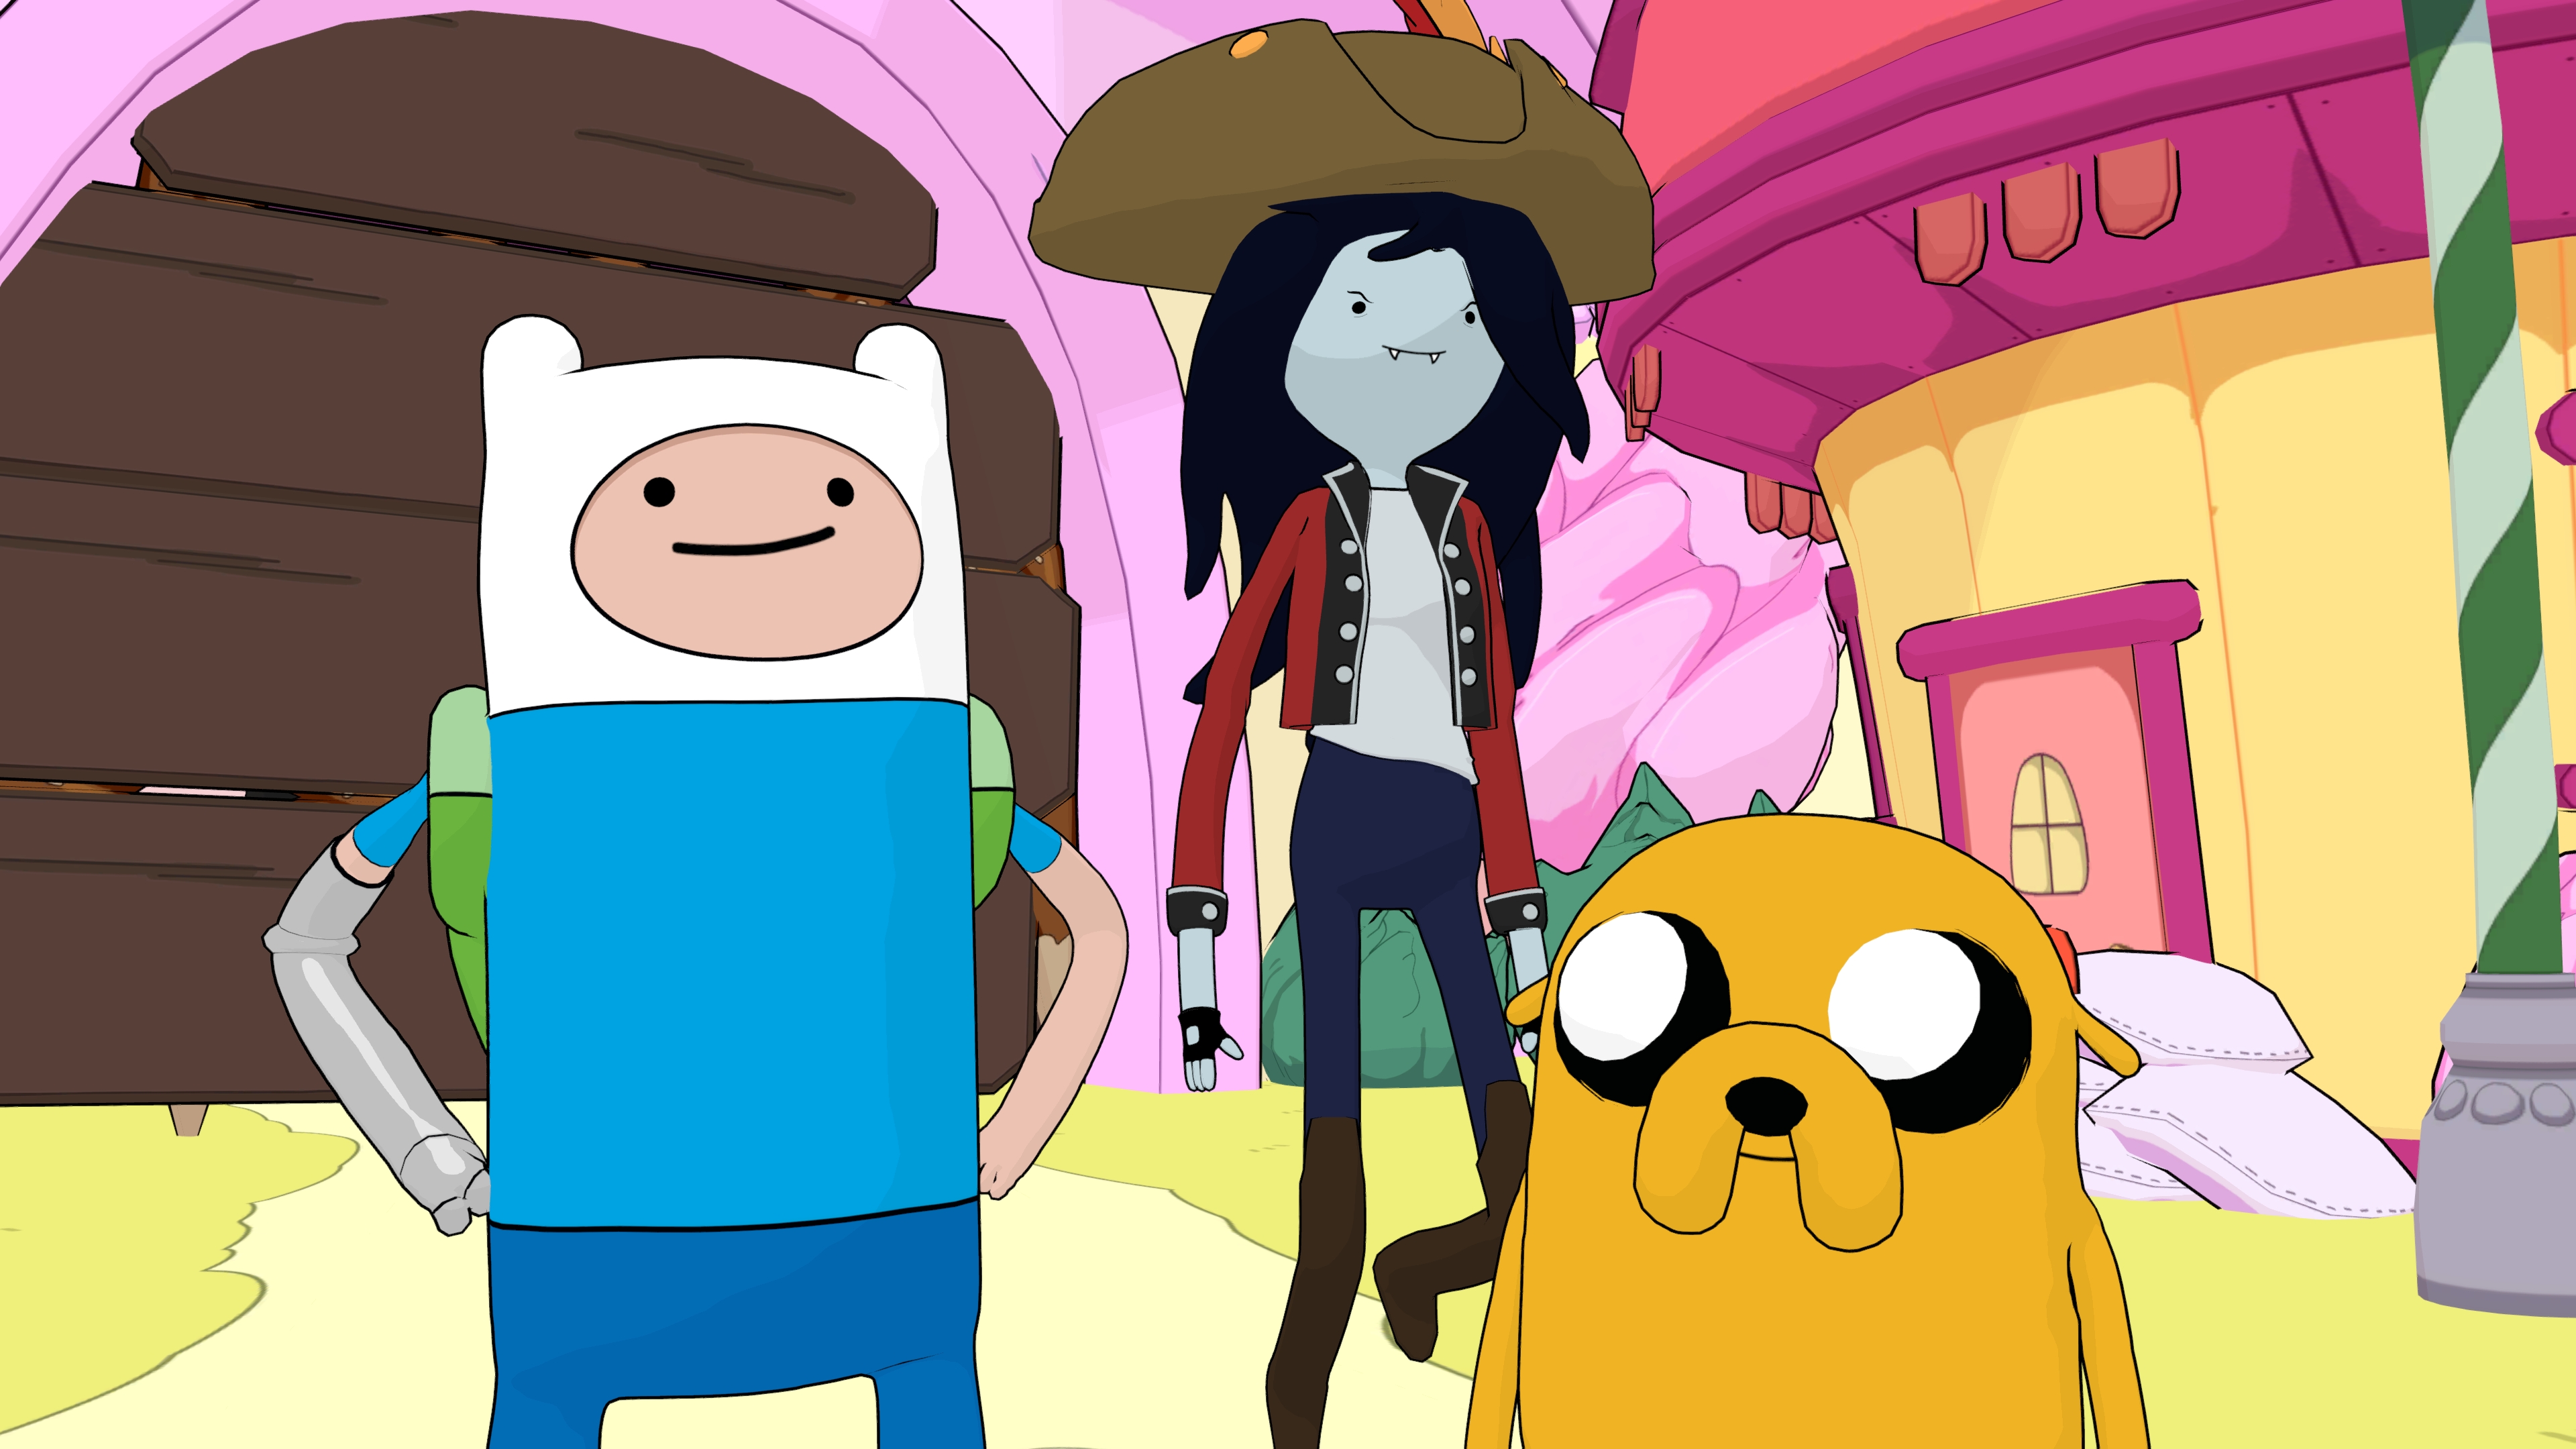 video game, adventure time: pirates of the enchiridion, finn (adventure time), jake (adventure time), marceline (adventure time)